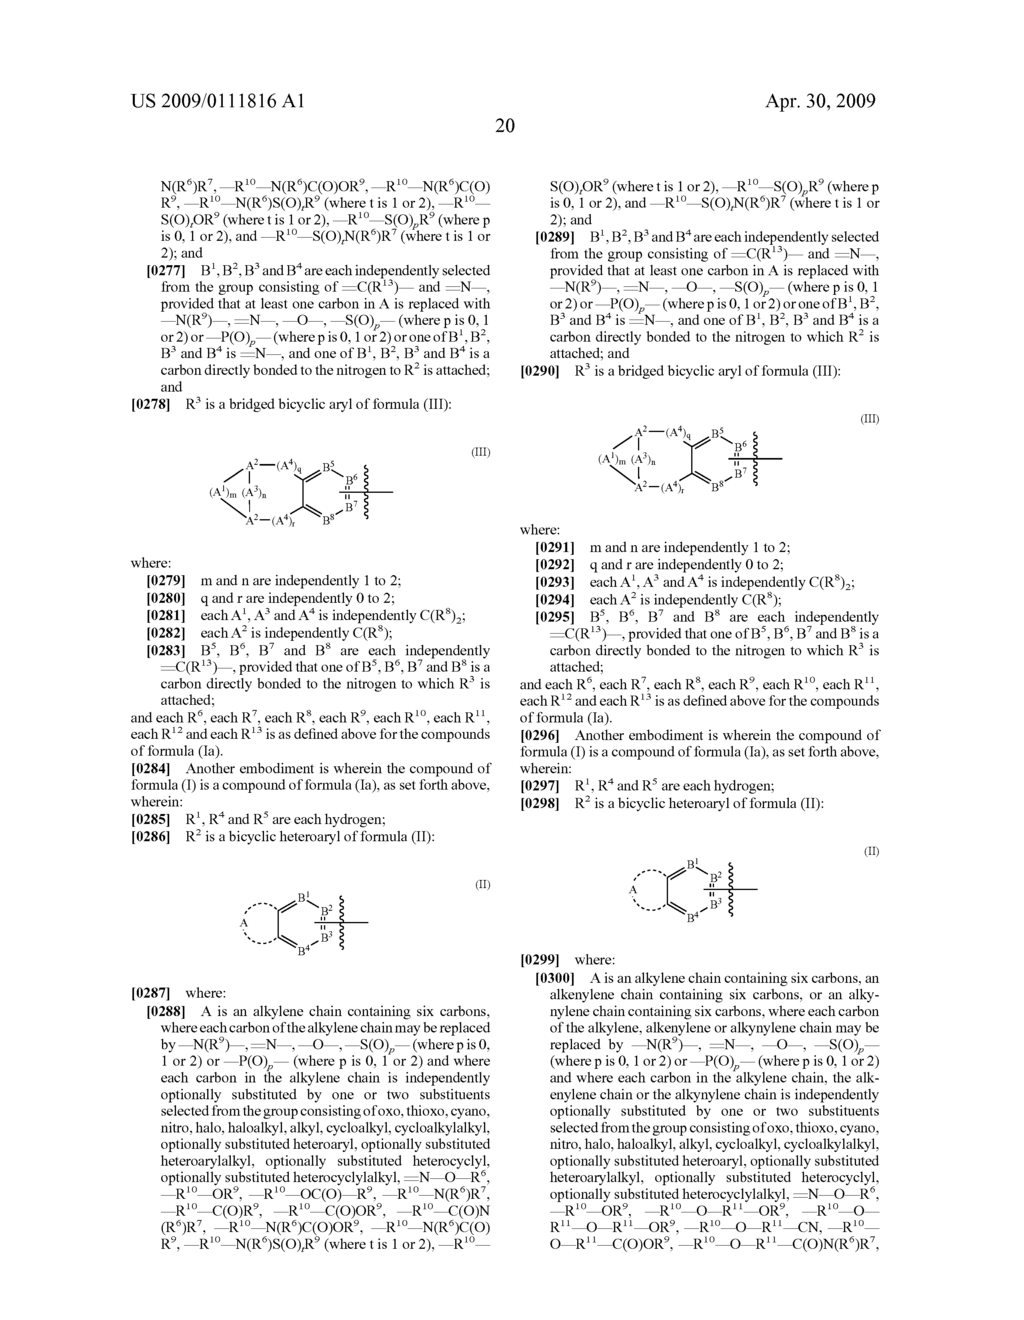 POLYCYCLIC ARYL SUBSTITUTED TRIAZOLES AND POLYCYCLIC HETEROARYL SUBSTITUTED TRIAZOLES USEFUL AS AXL INHIBITORS - diagram, schematic, and image 21